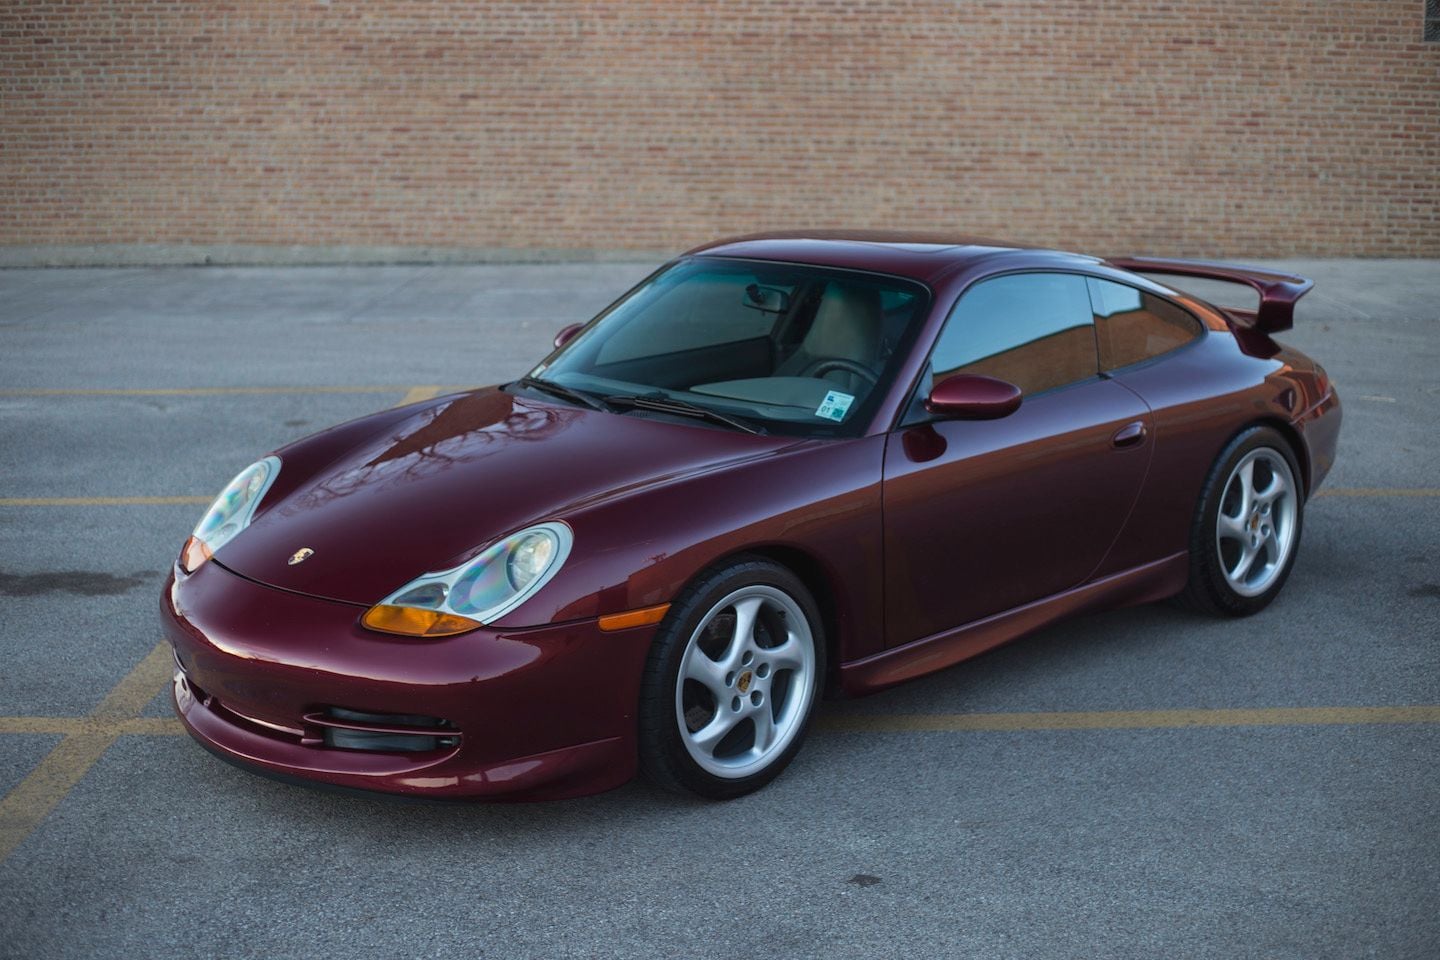 1999 Porsche 911 - 1999 Porsche 911 C2 - Aerokit - 6sp - 57k - Awesome Condition - Used - VIN WP0AA2996XS622101 - 57,000 Miles - Harwood Heights, IL 60706, United States